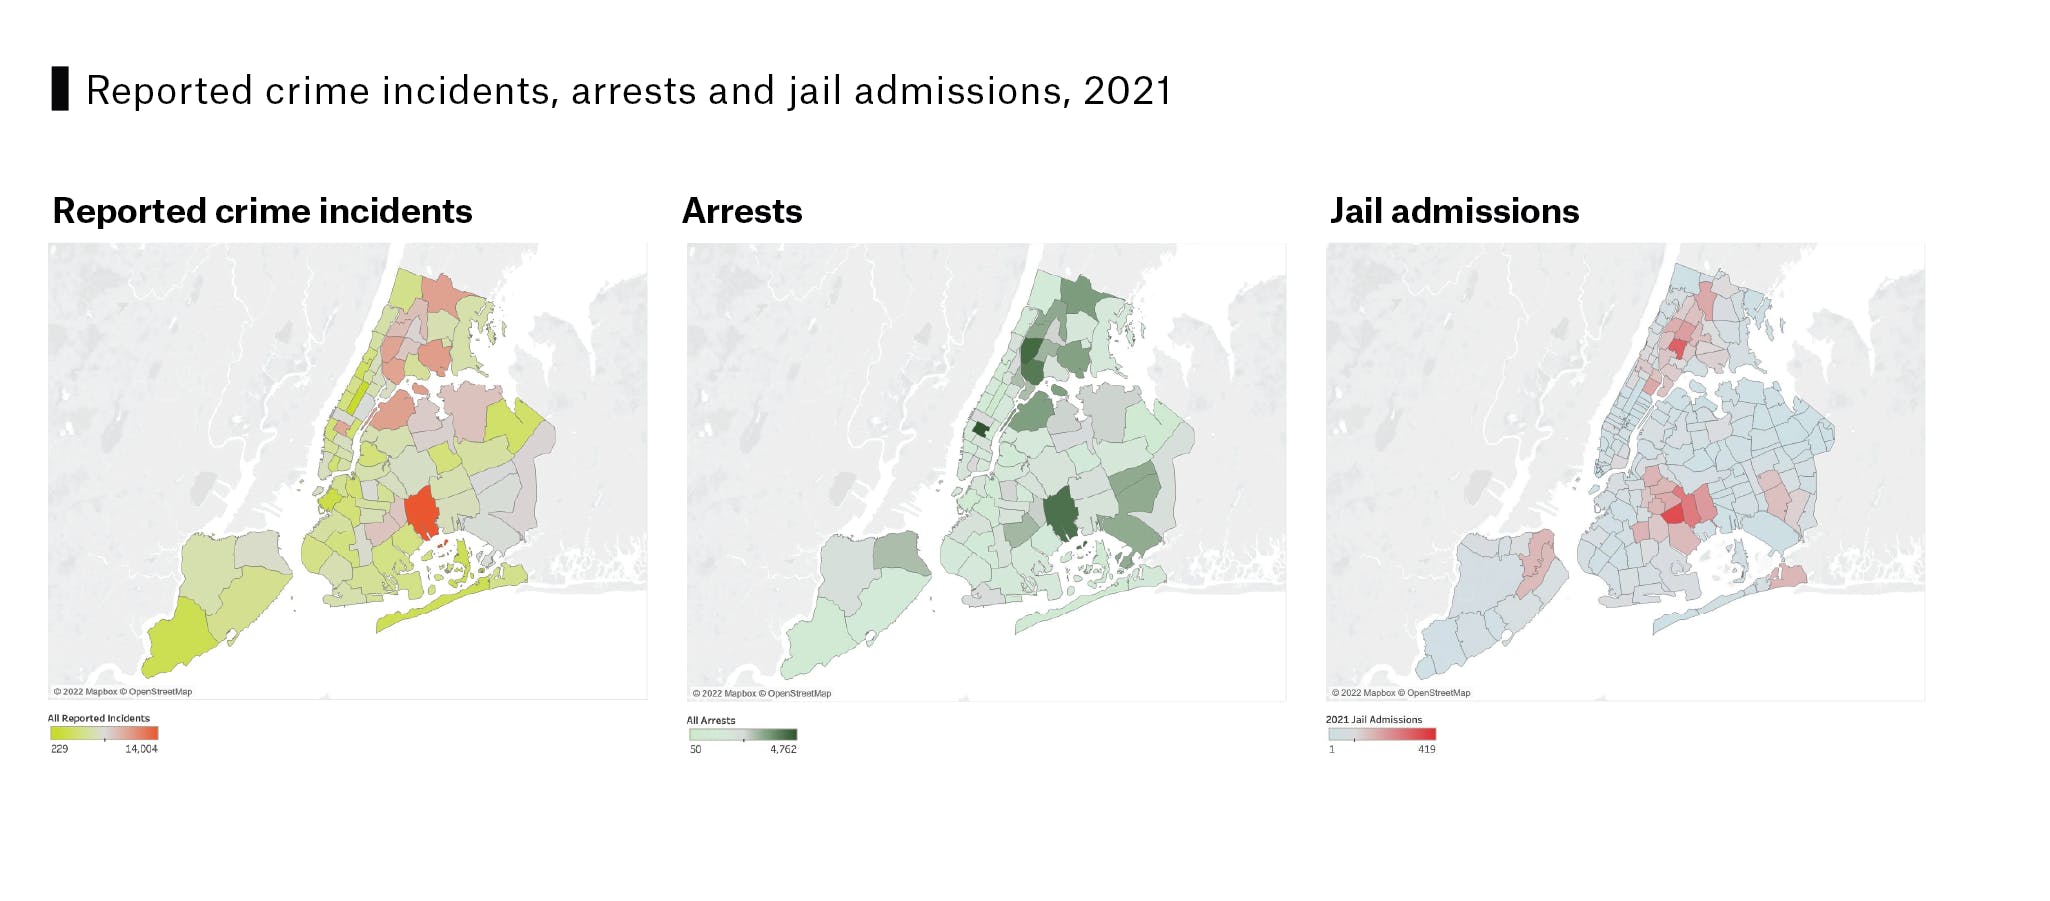 3 side-by-side area charts show crime, arrests, and jail admissions by precinct in 2021. Crime and arrests are mostly occurring in Brooklyn and the Bronx, surrounding areas where jail admissions are more concentrated.